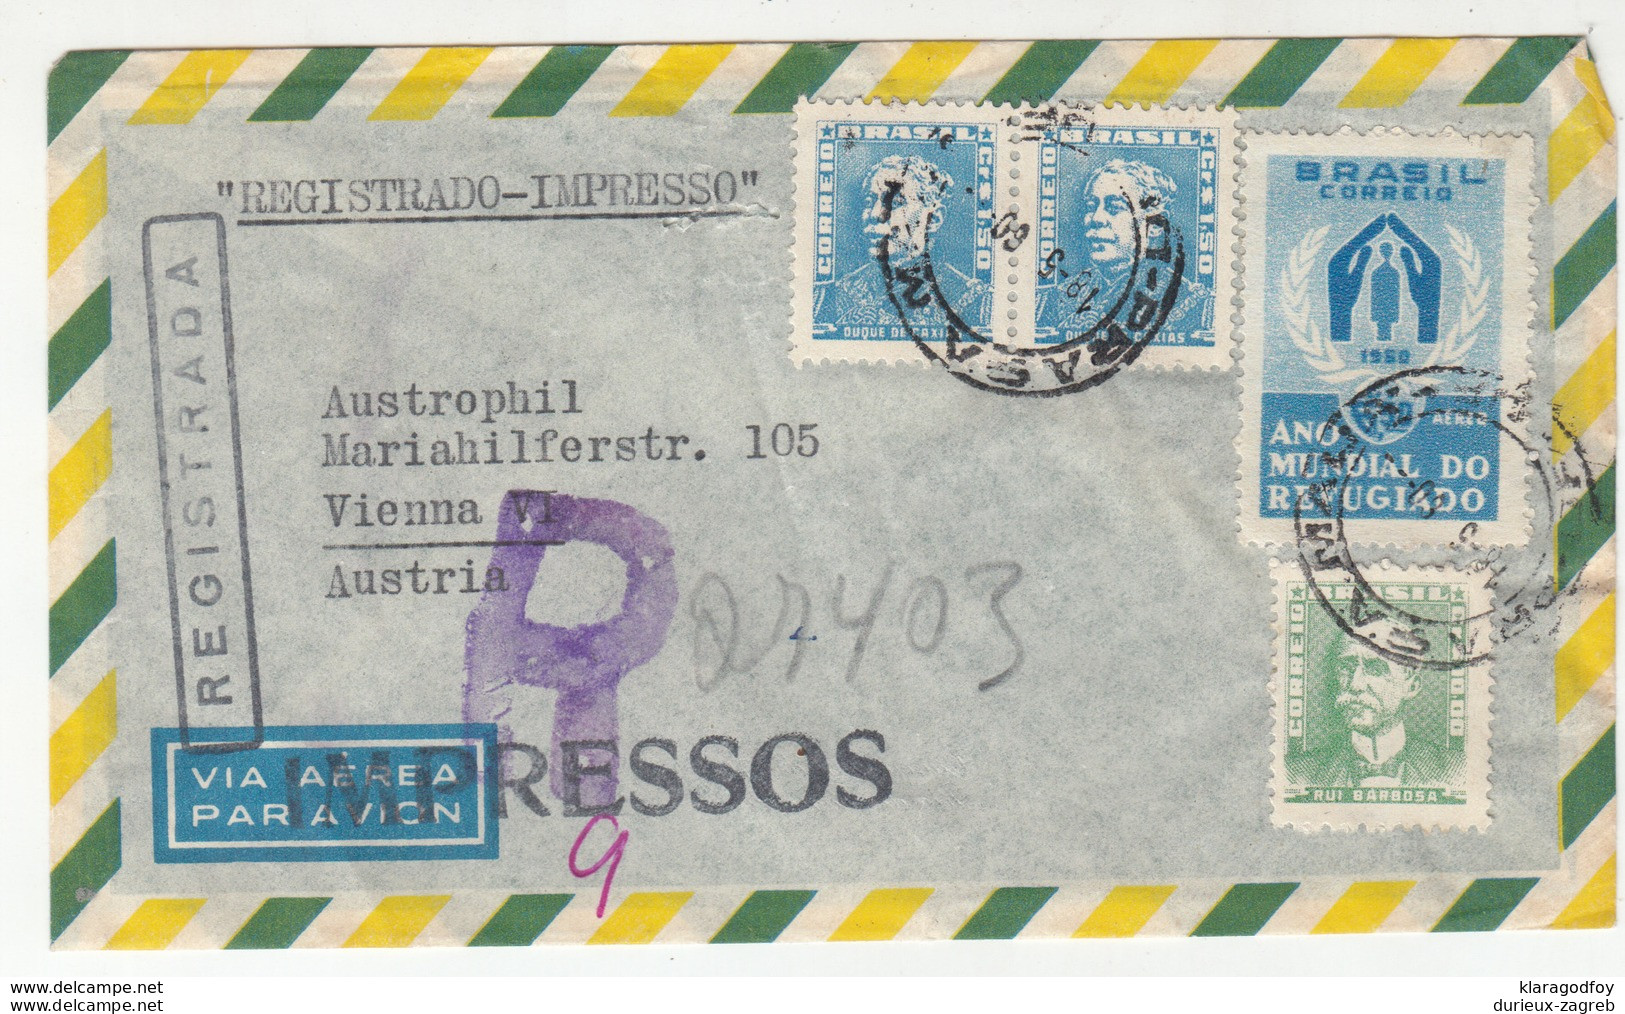 Brasil Air Mail Letter Cover Posted Registered 1960 To Austria B191201 - Covers & Documents